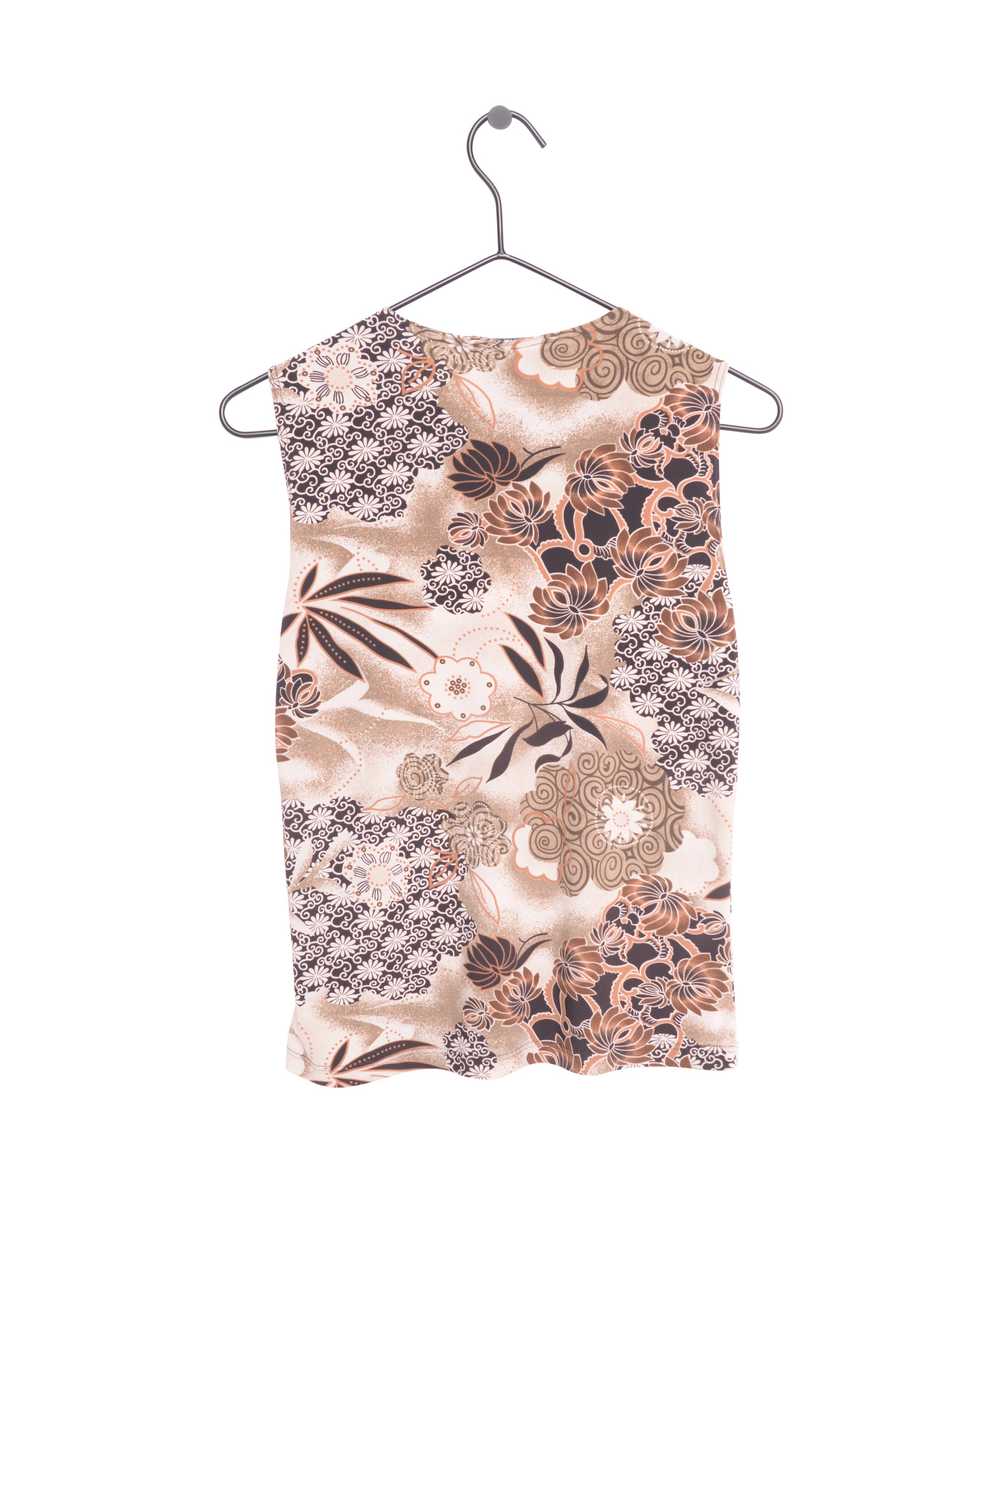 1990s Floral All-Over Top USA - image 2